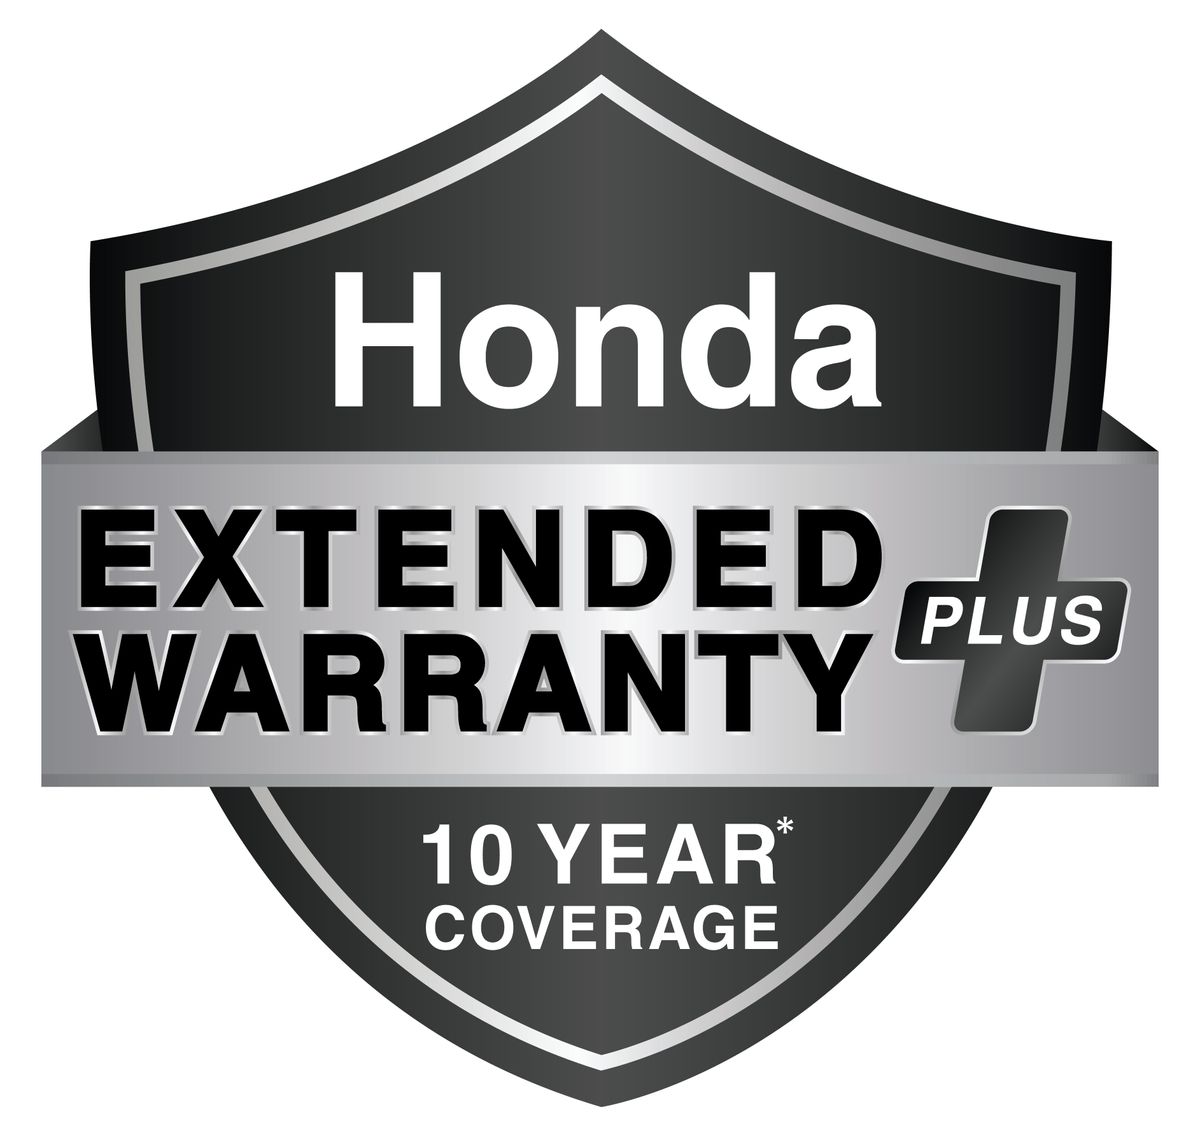 Honda Motorcycle & Scooter India launches special 10 year ‘Extended Warranty’ & ‘Extended Warranty Plus’ programs for CB350 H’ness & CB350RS